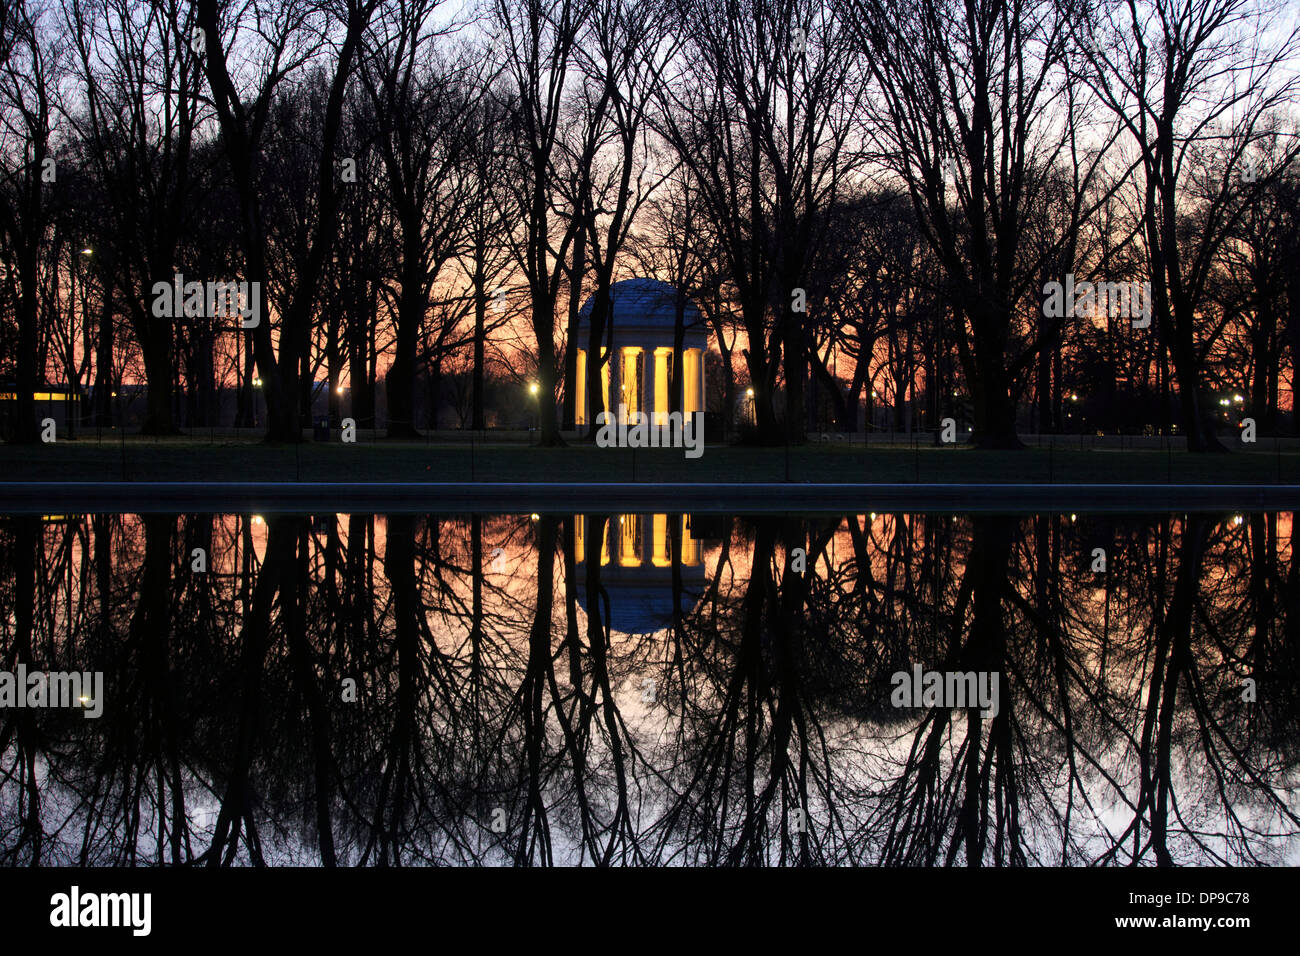 The World War 1 memorial mirrored in the reflecting pool , Washington DC. 17 December, 2013. photo by Trevor Collens. Stock Photo